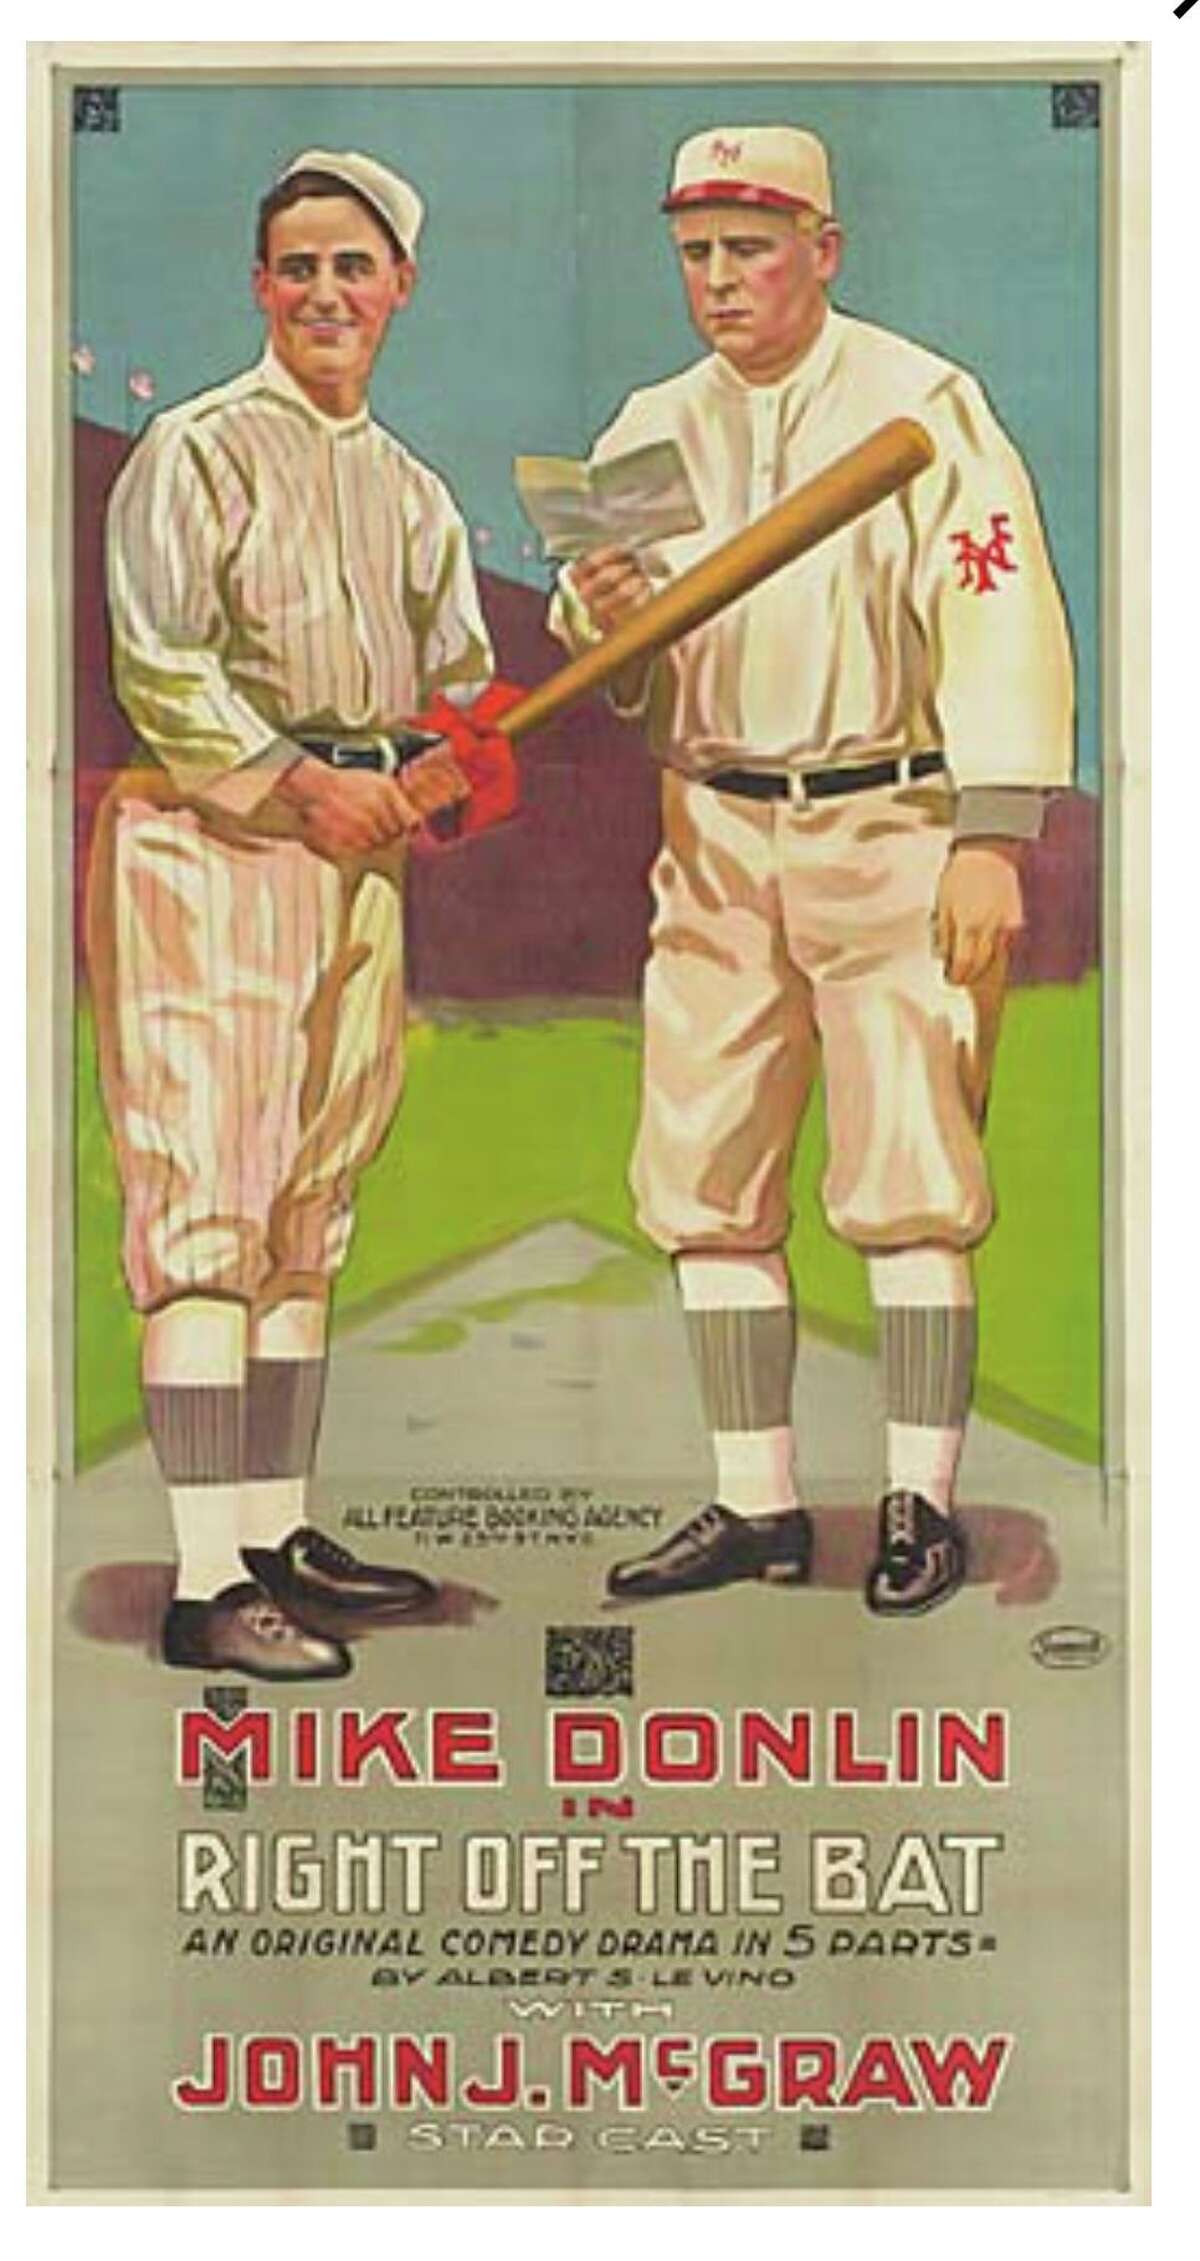 A movie poster for “Right Off the Bat” which was filmed in Winsted in 1915, starring N.Y. Giants outfielder Mike Donlin, left. He is pictured with John McGraw, a Hall of Famer and former Giants manager.